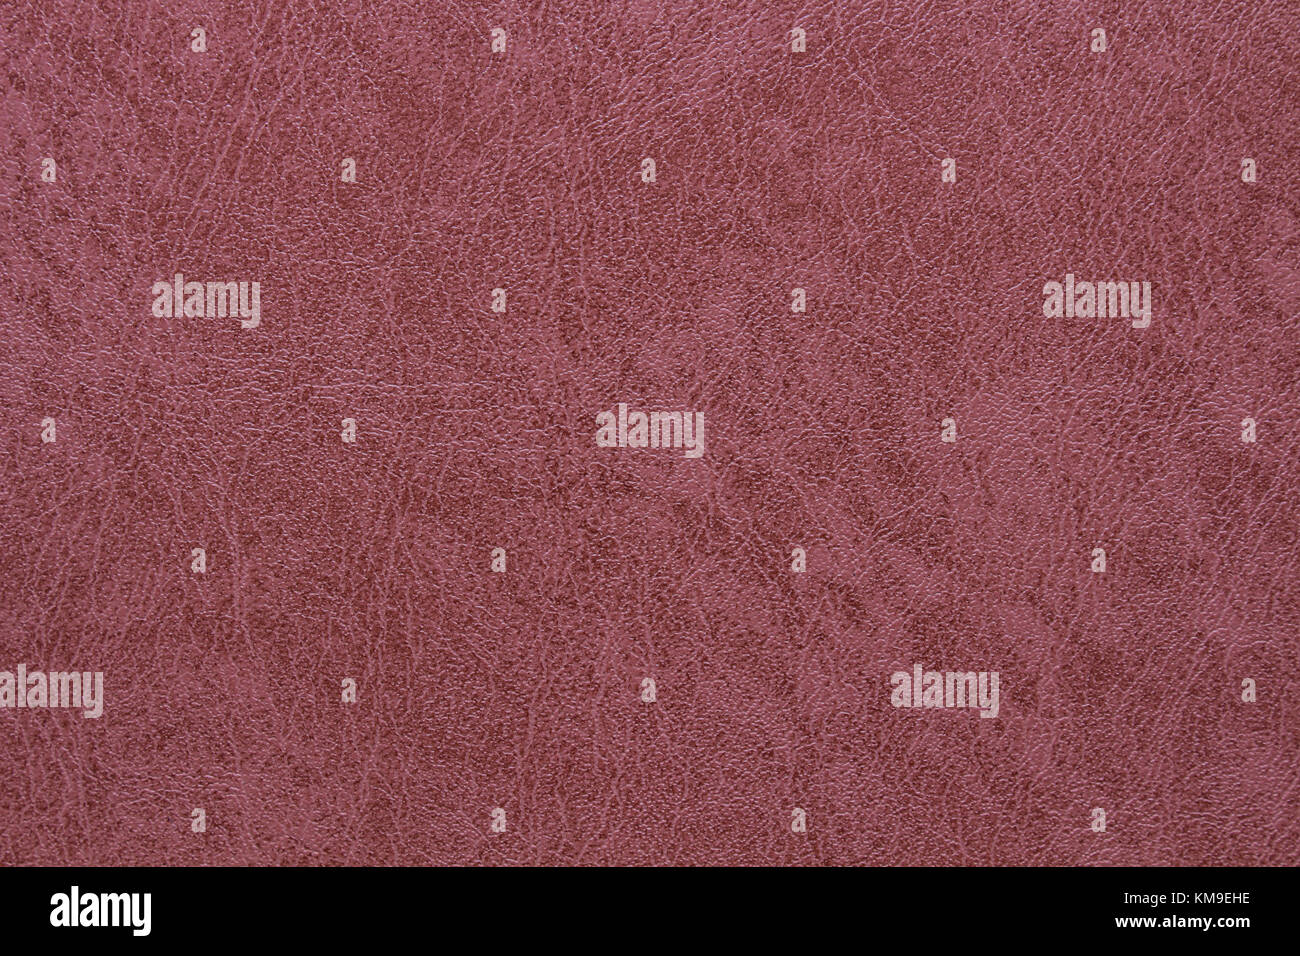 Surface of Leatherette, Leatherette texture, Leatherette background. Stock Photo